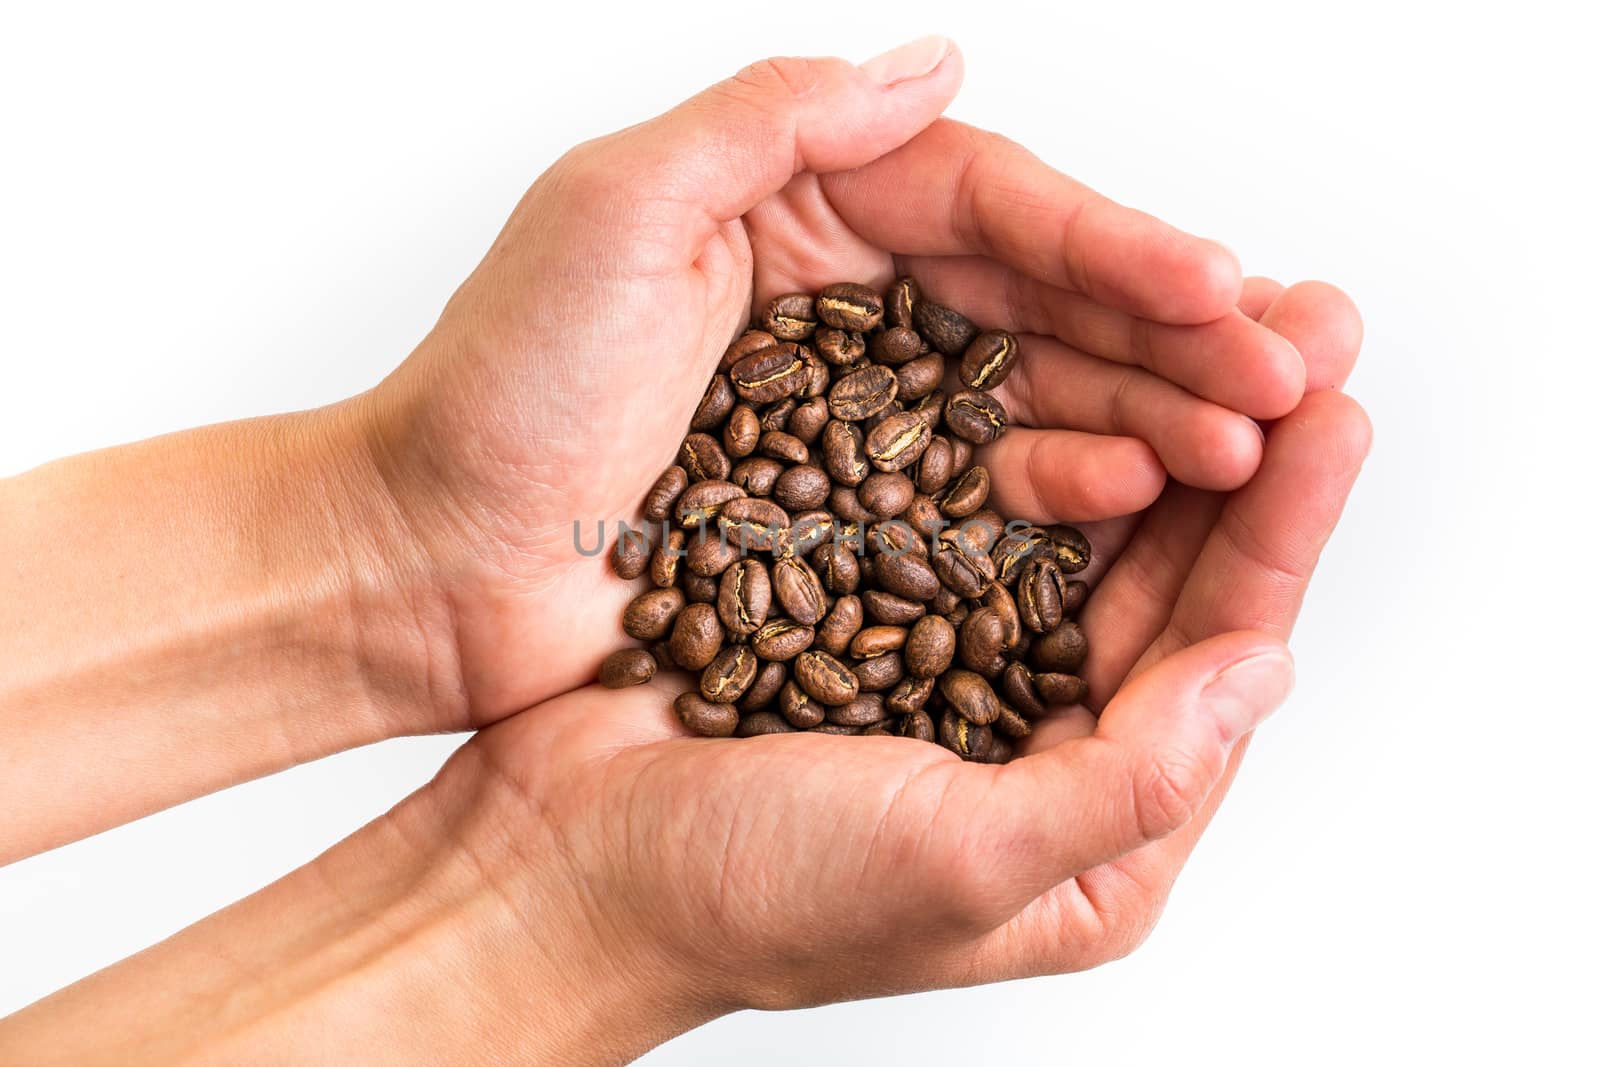 Young woman's hands holding coffee beans